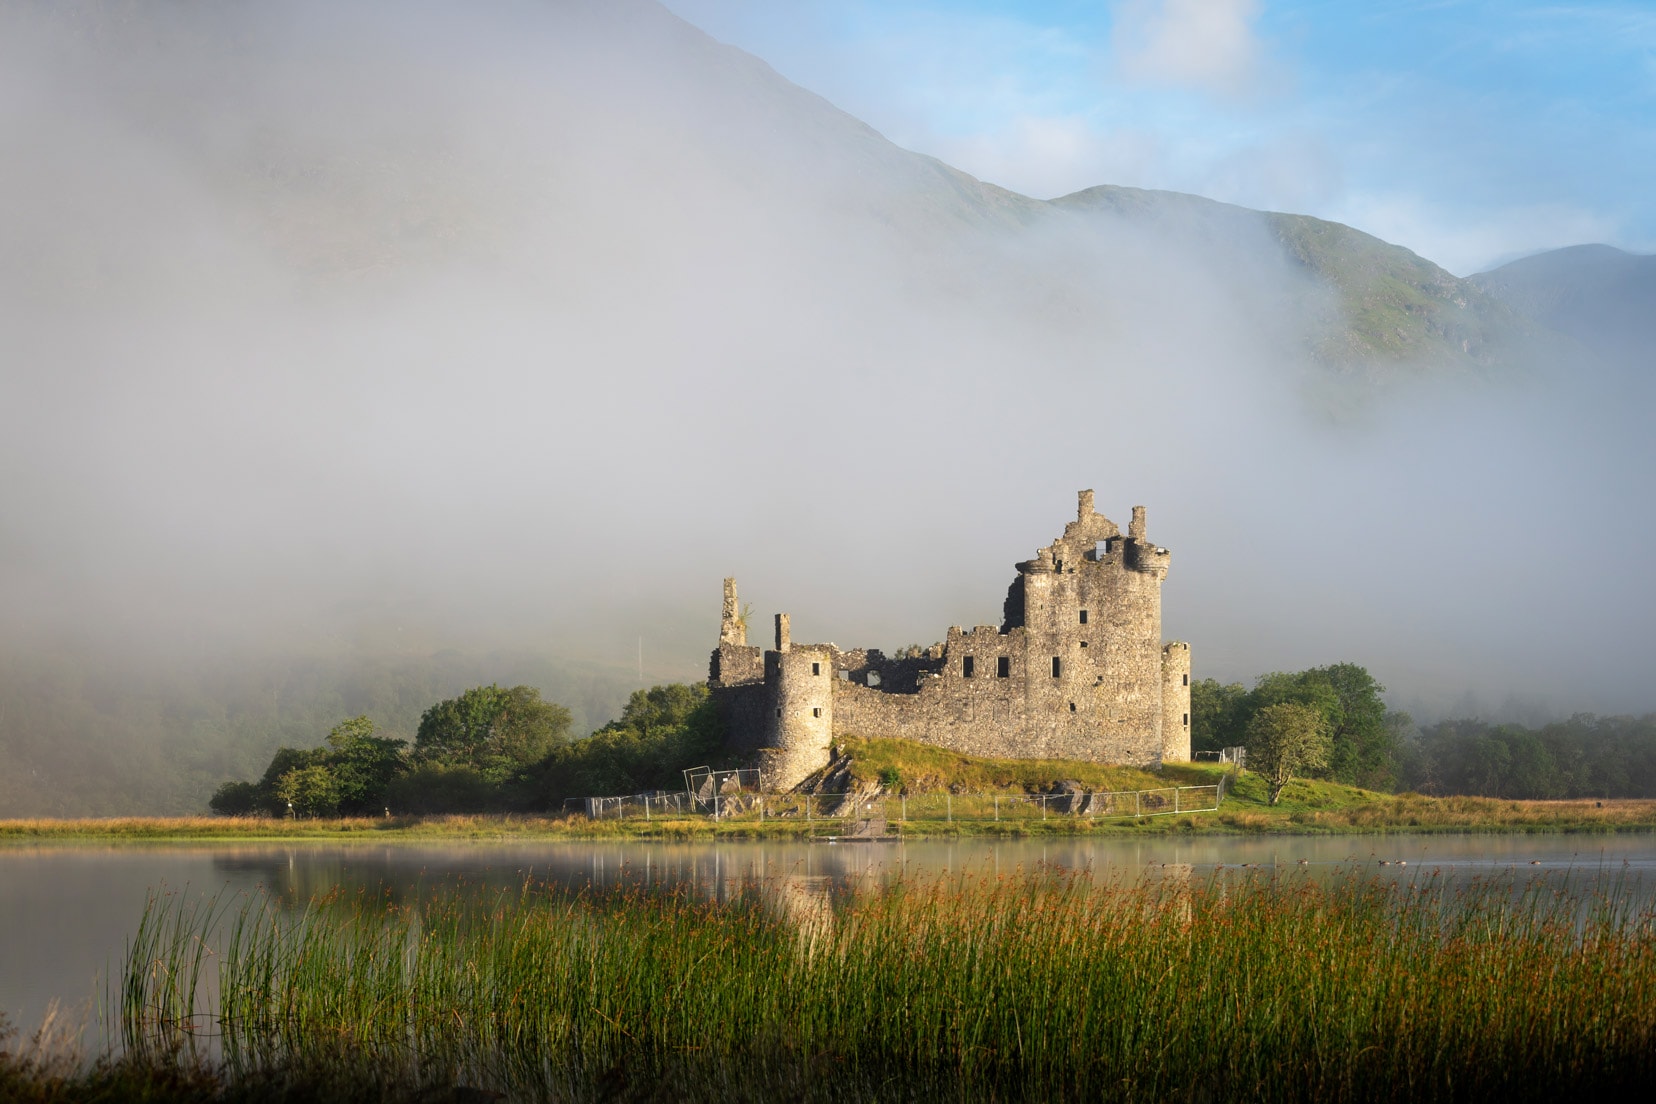 castle seen in the fog over a loch